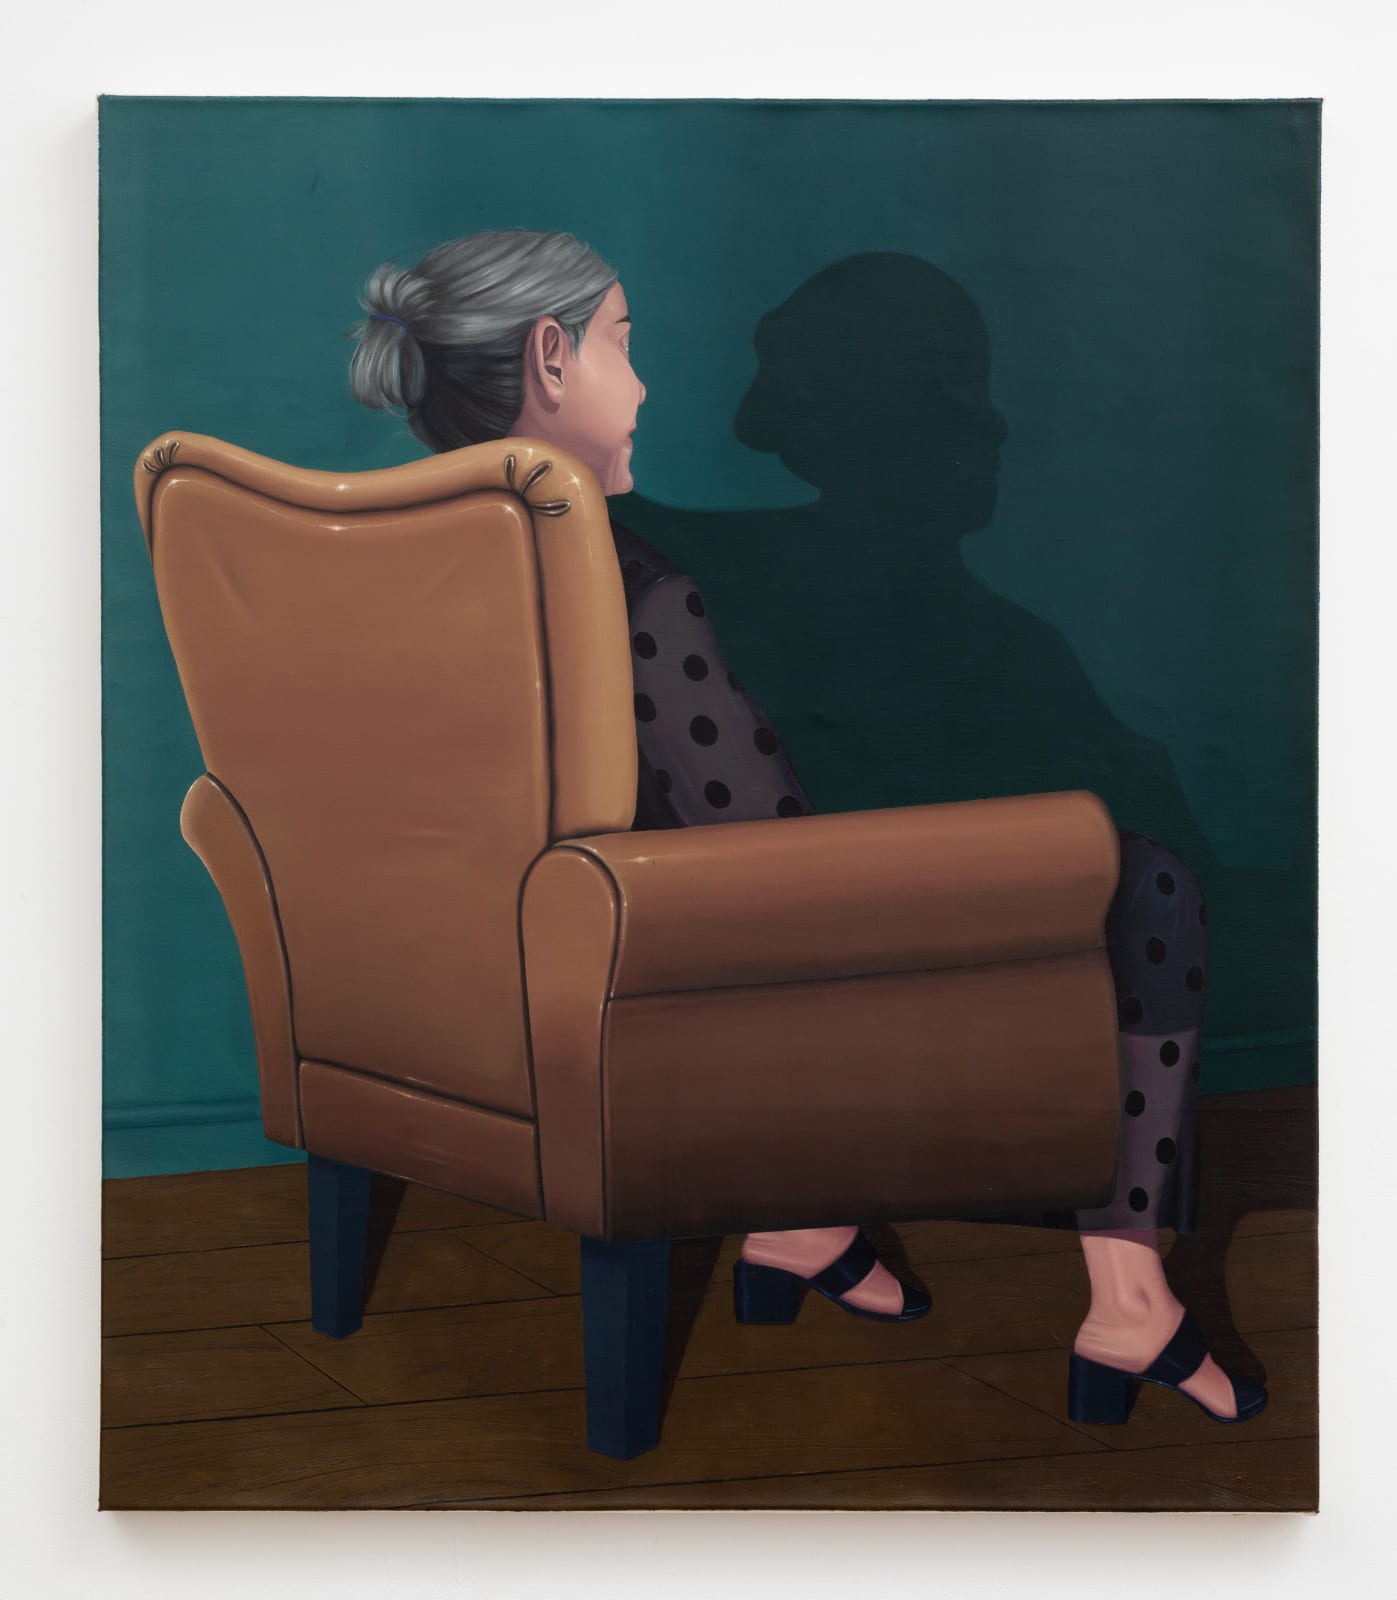 Painting portraying an older woman sitting on a brown leather chair, her back turned to the viewer, seemingly effortlessly holding up the chair with her feet, and staring at her shadow on a mallard green wall.